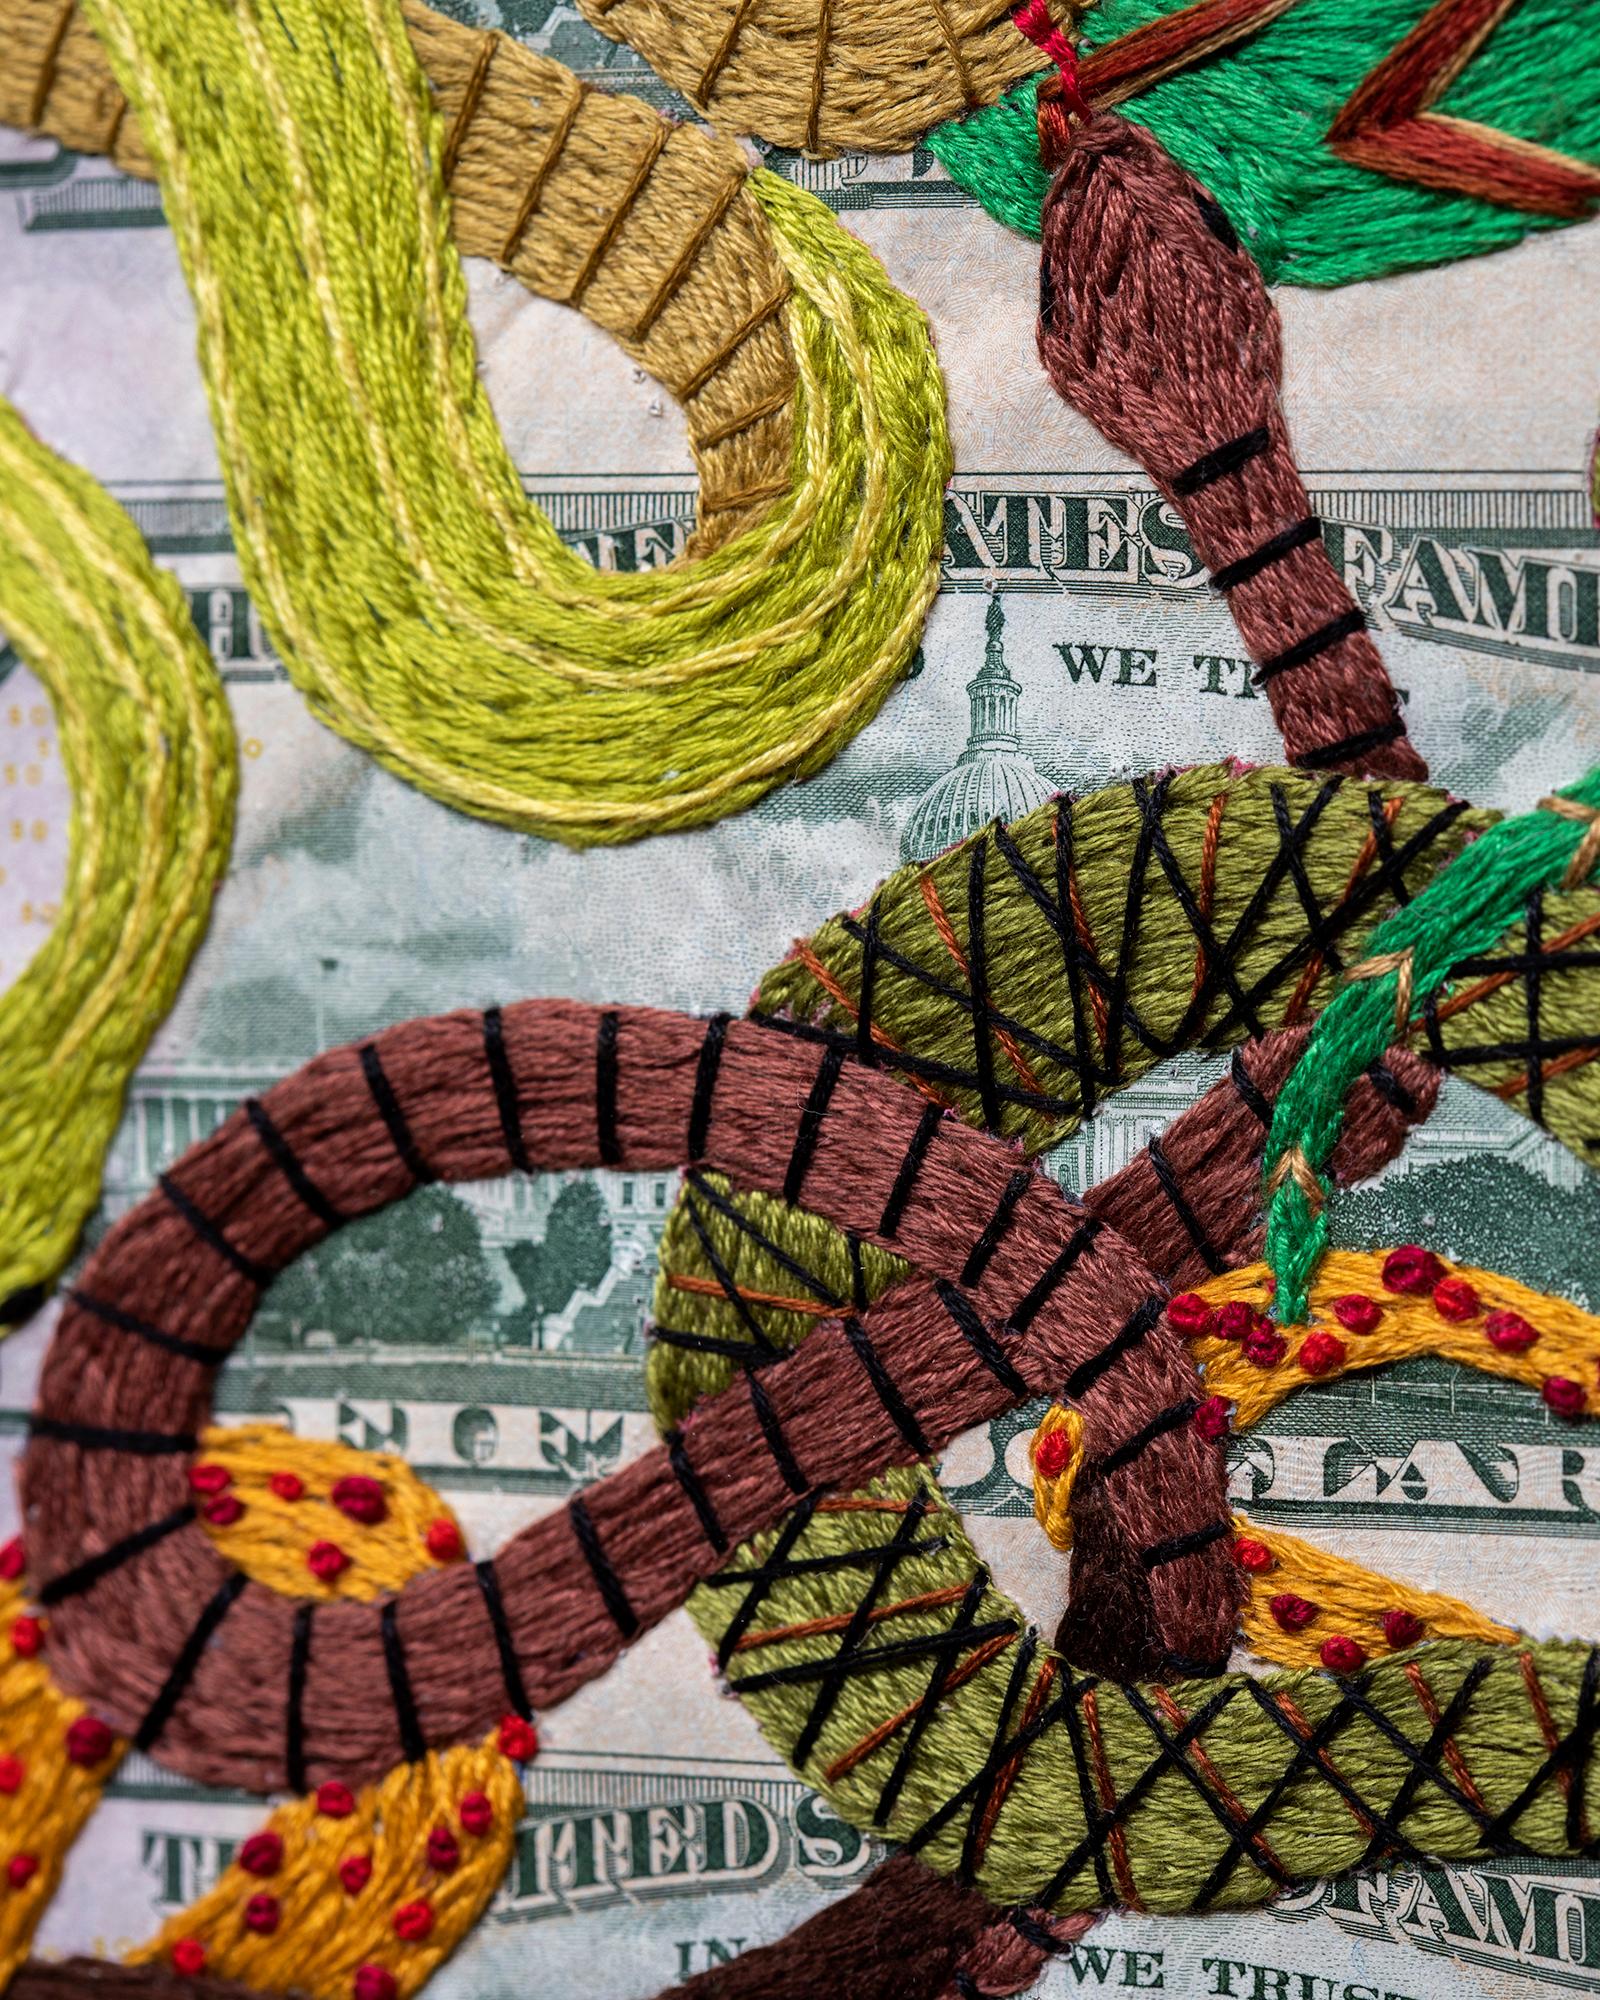  Stacey Lee Webber

Uncut US Capital Snakes

15.75” x 17.5”

hand stitched paper currency

2022